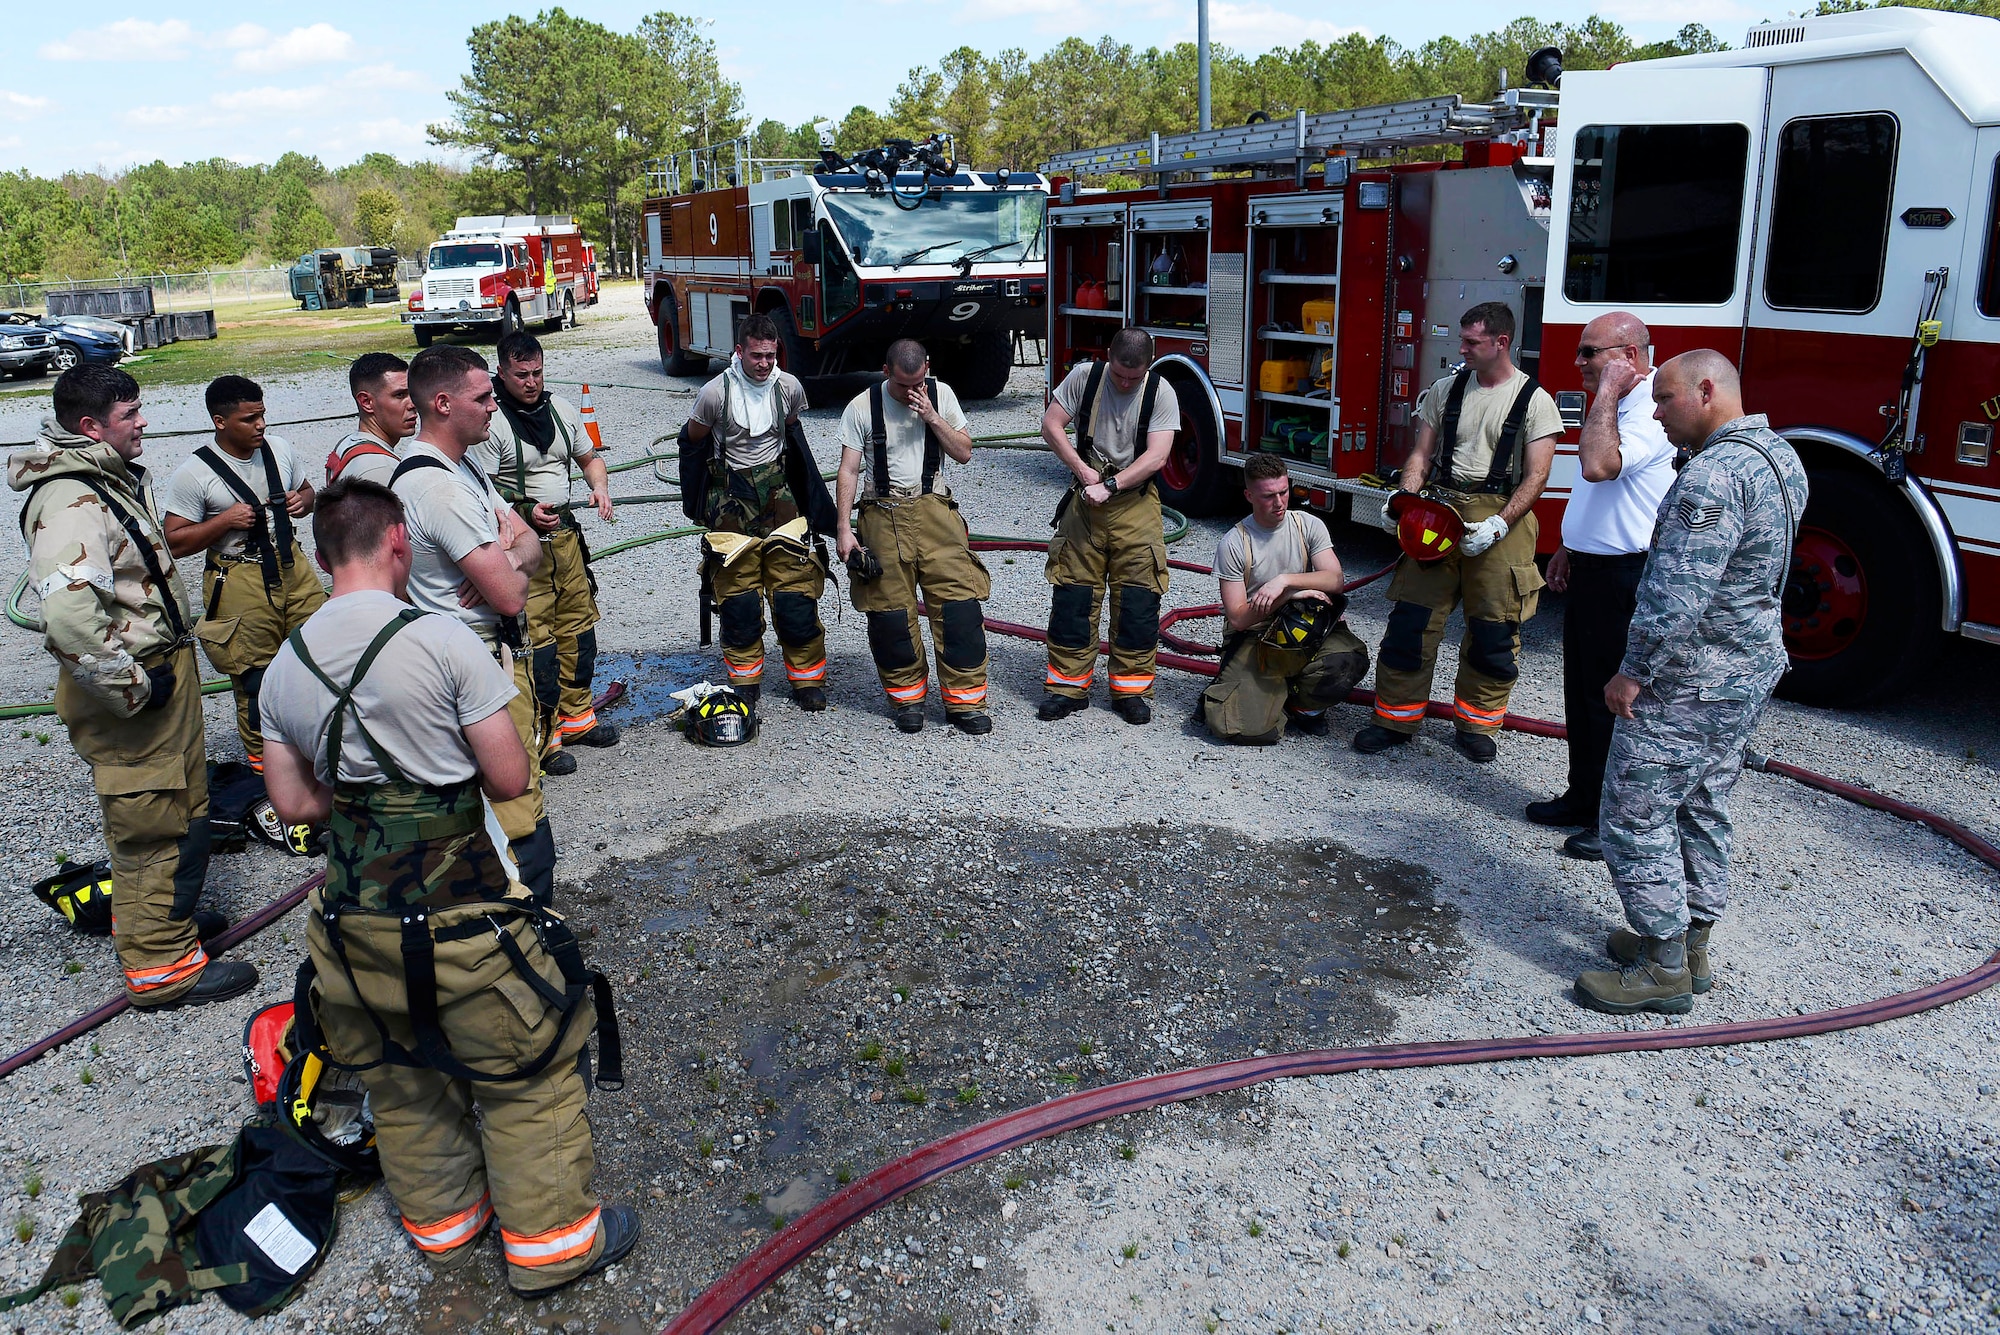 U.S. Airmen assigned to the 20th Civil Engineer Squadron fire department participate in a hot wash on their training procedures at Shaw Air Force Base, S.C., March 14, 2016. Airmen assigned to the 20th CES fire department are given extensive training and procedures that must be executed effectively with minimal errors. (U.S. Air Force photo by Airman 1st Class Christopher Maldonado)